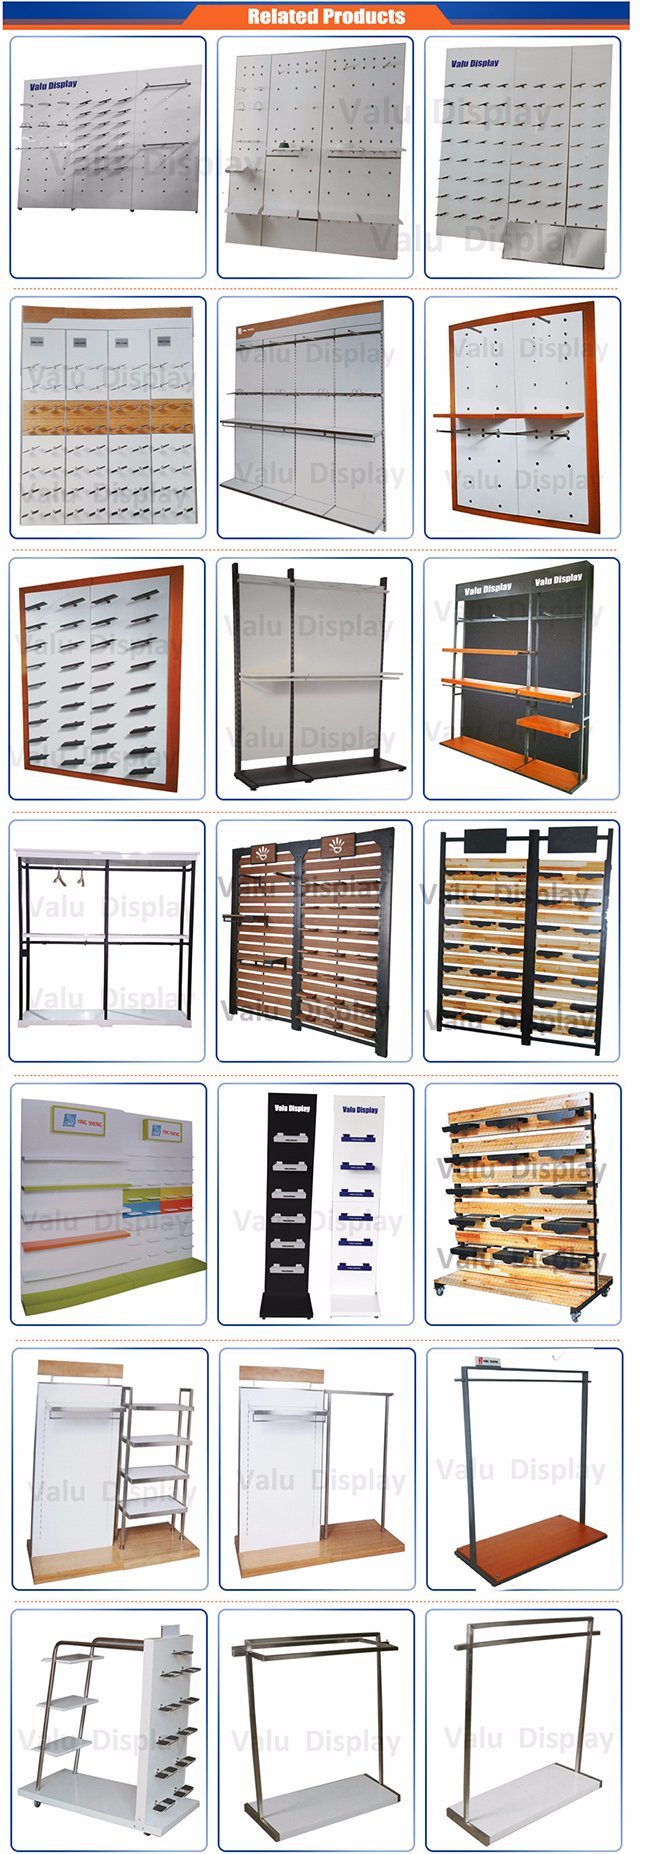 Metal Wall Display Rack, Slatwall, Wall Unit, Slat Wall Unit with Shelves for Retail Store